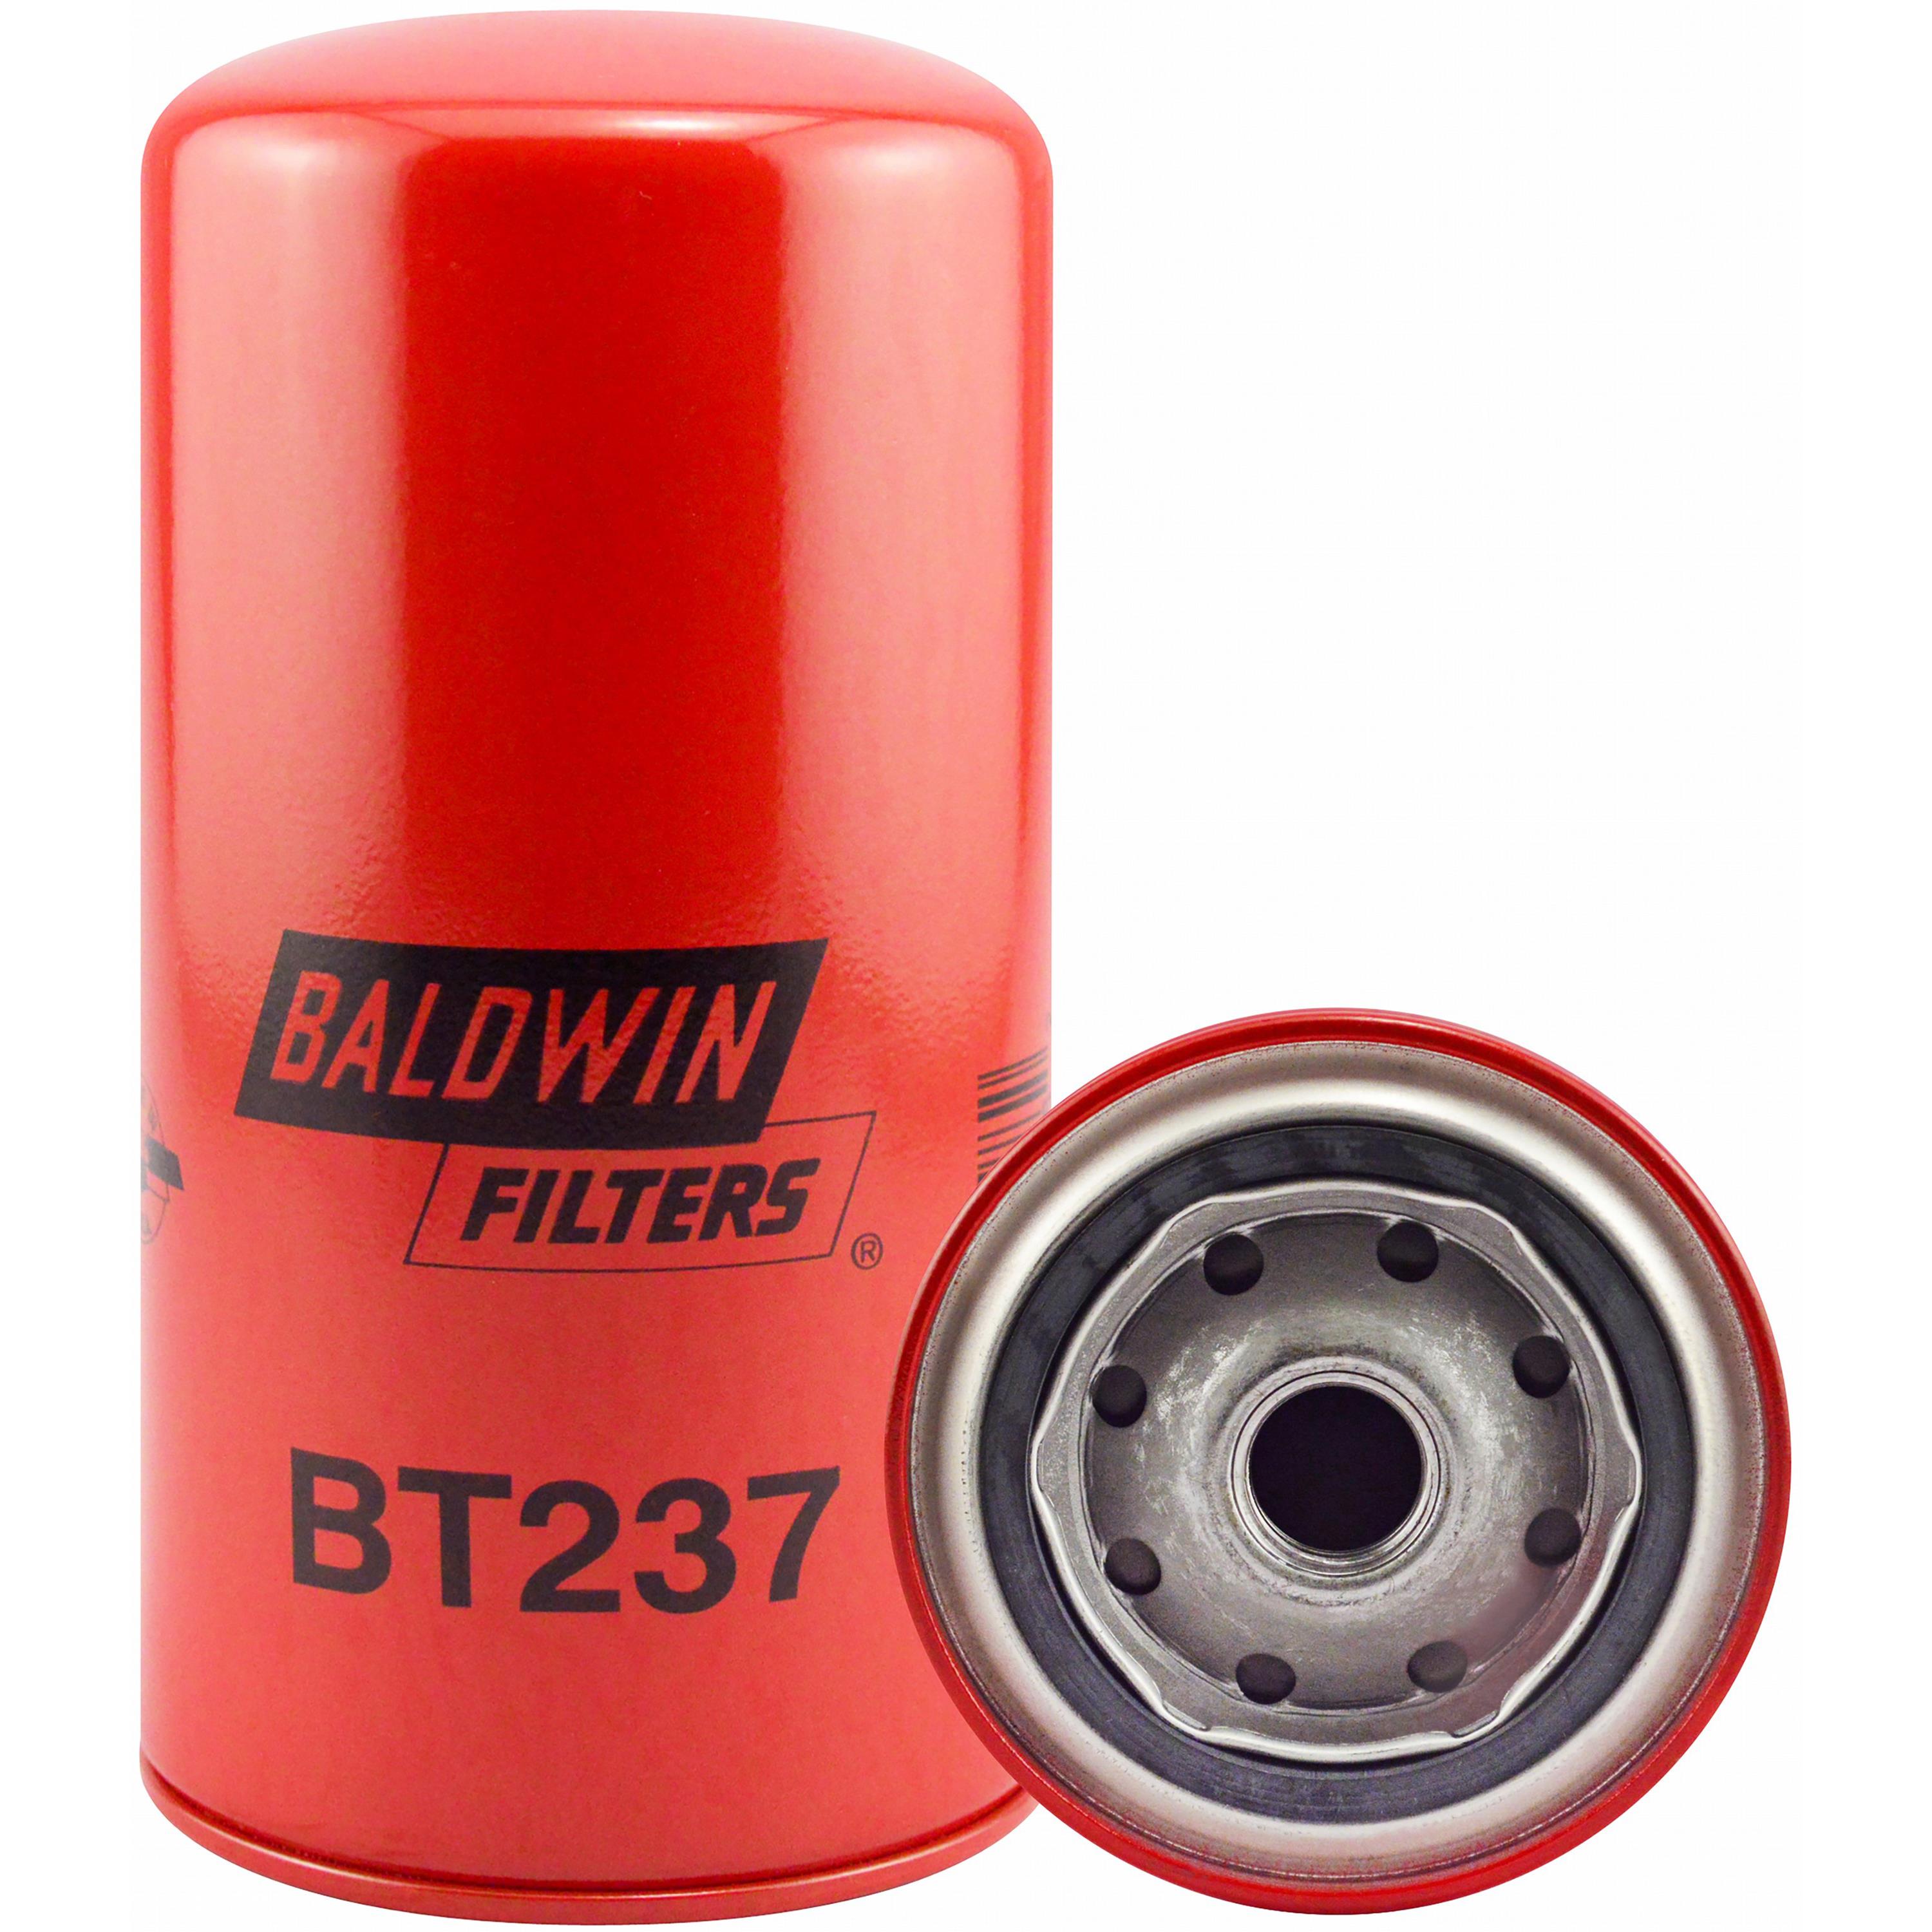 bbt237-baldwin-lube-filter-spin-on-case-of-12-filters